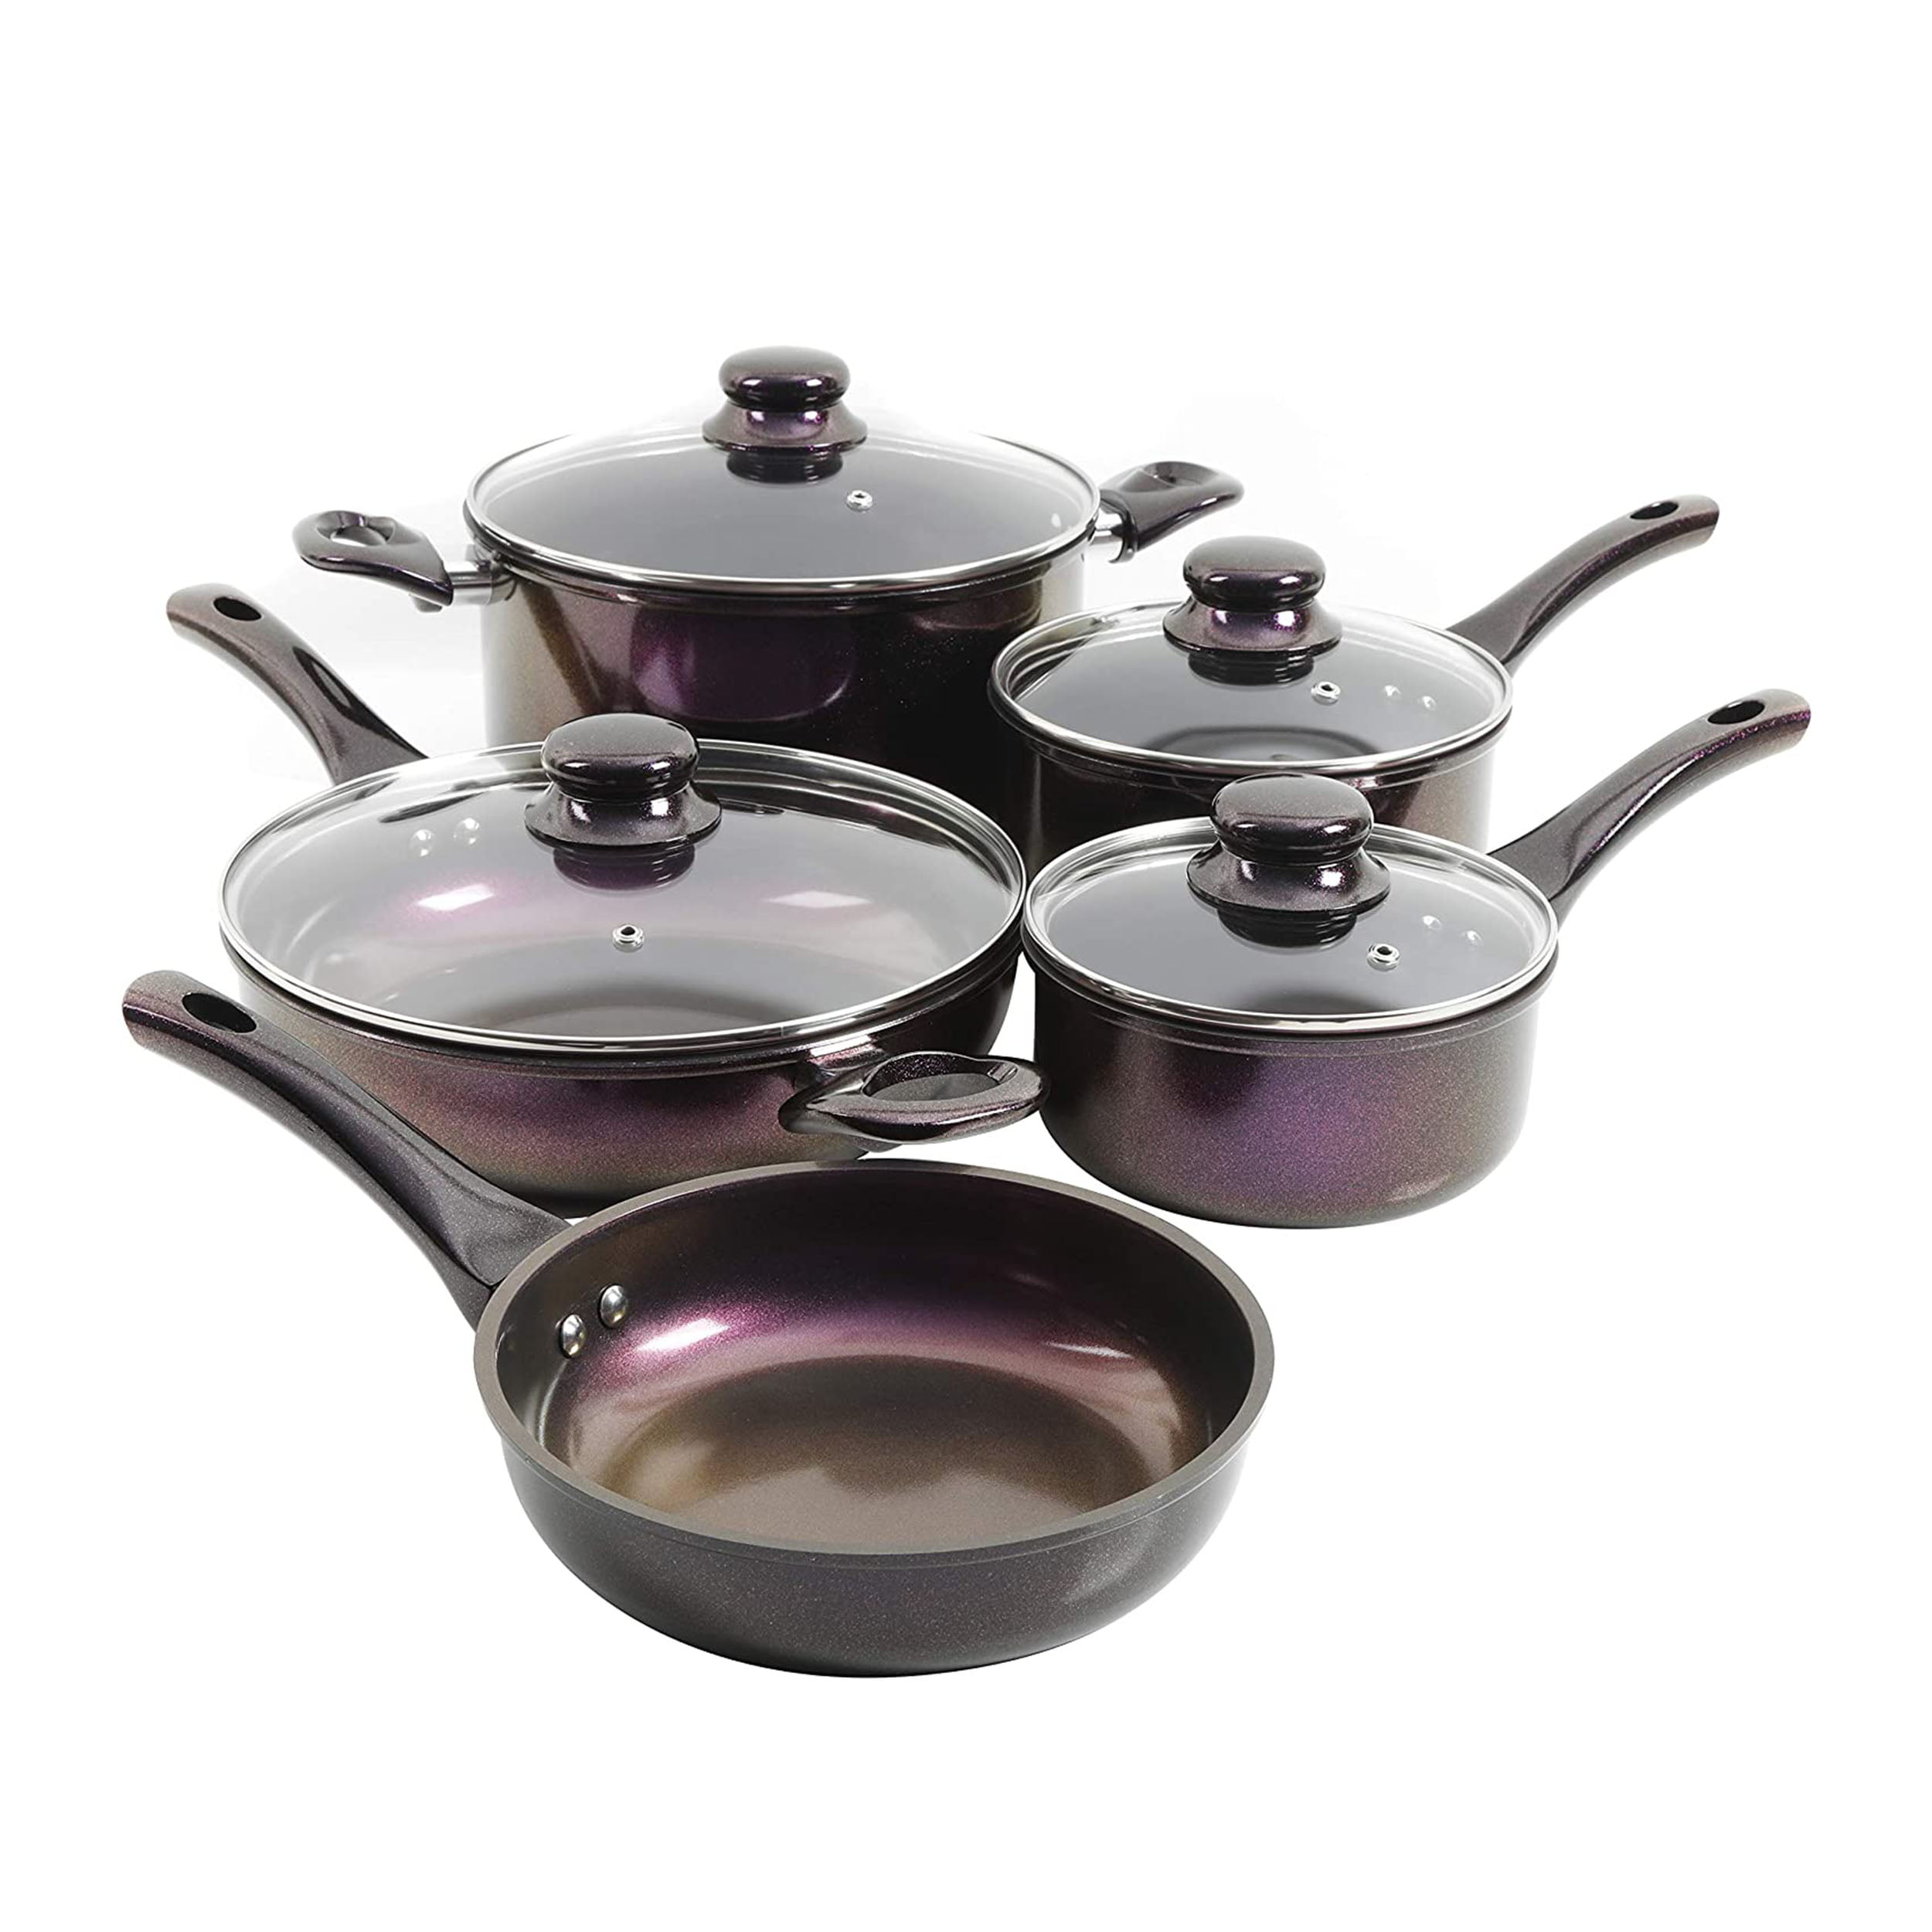 9 Piece Non-stick Aluminum Cookware for Sale in Tracy, CA - OfferUp